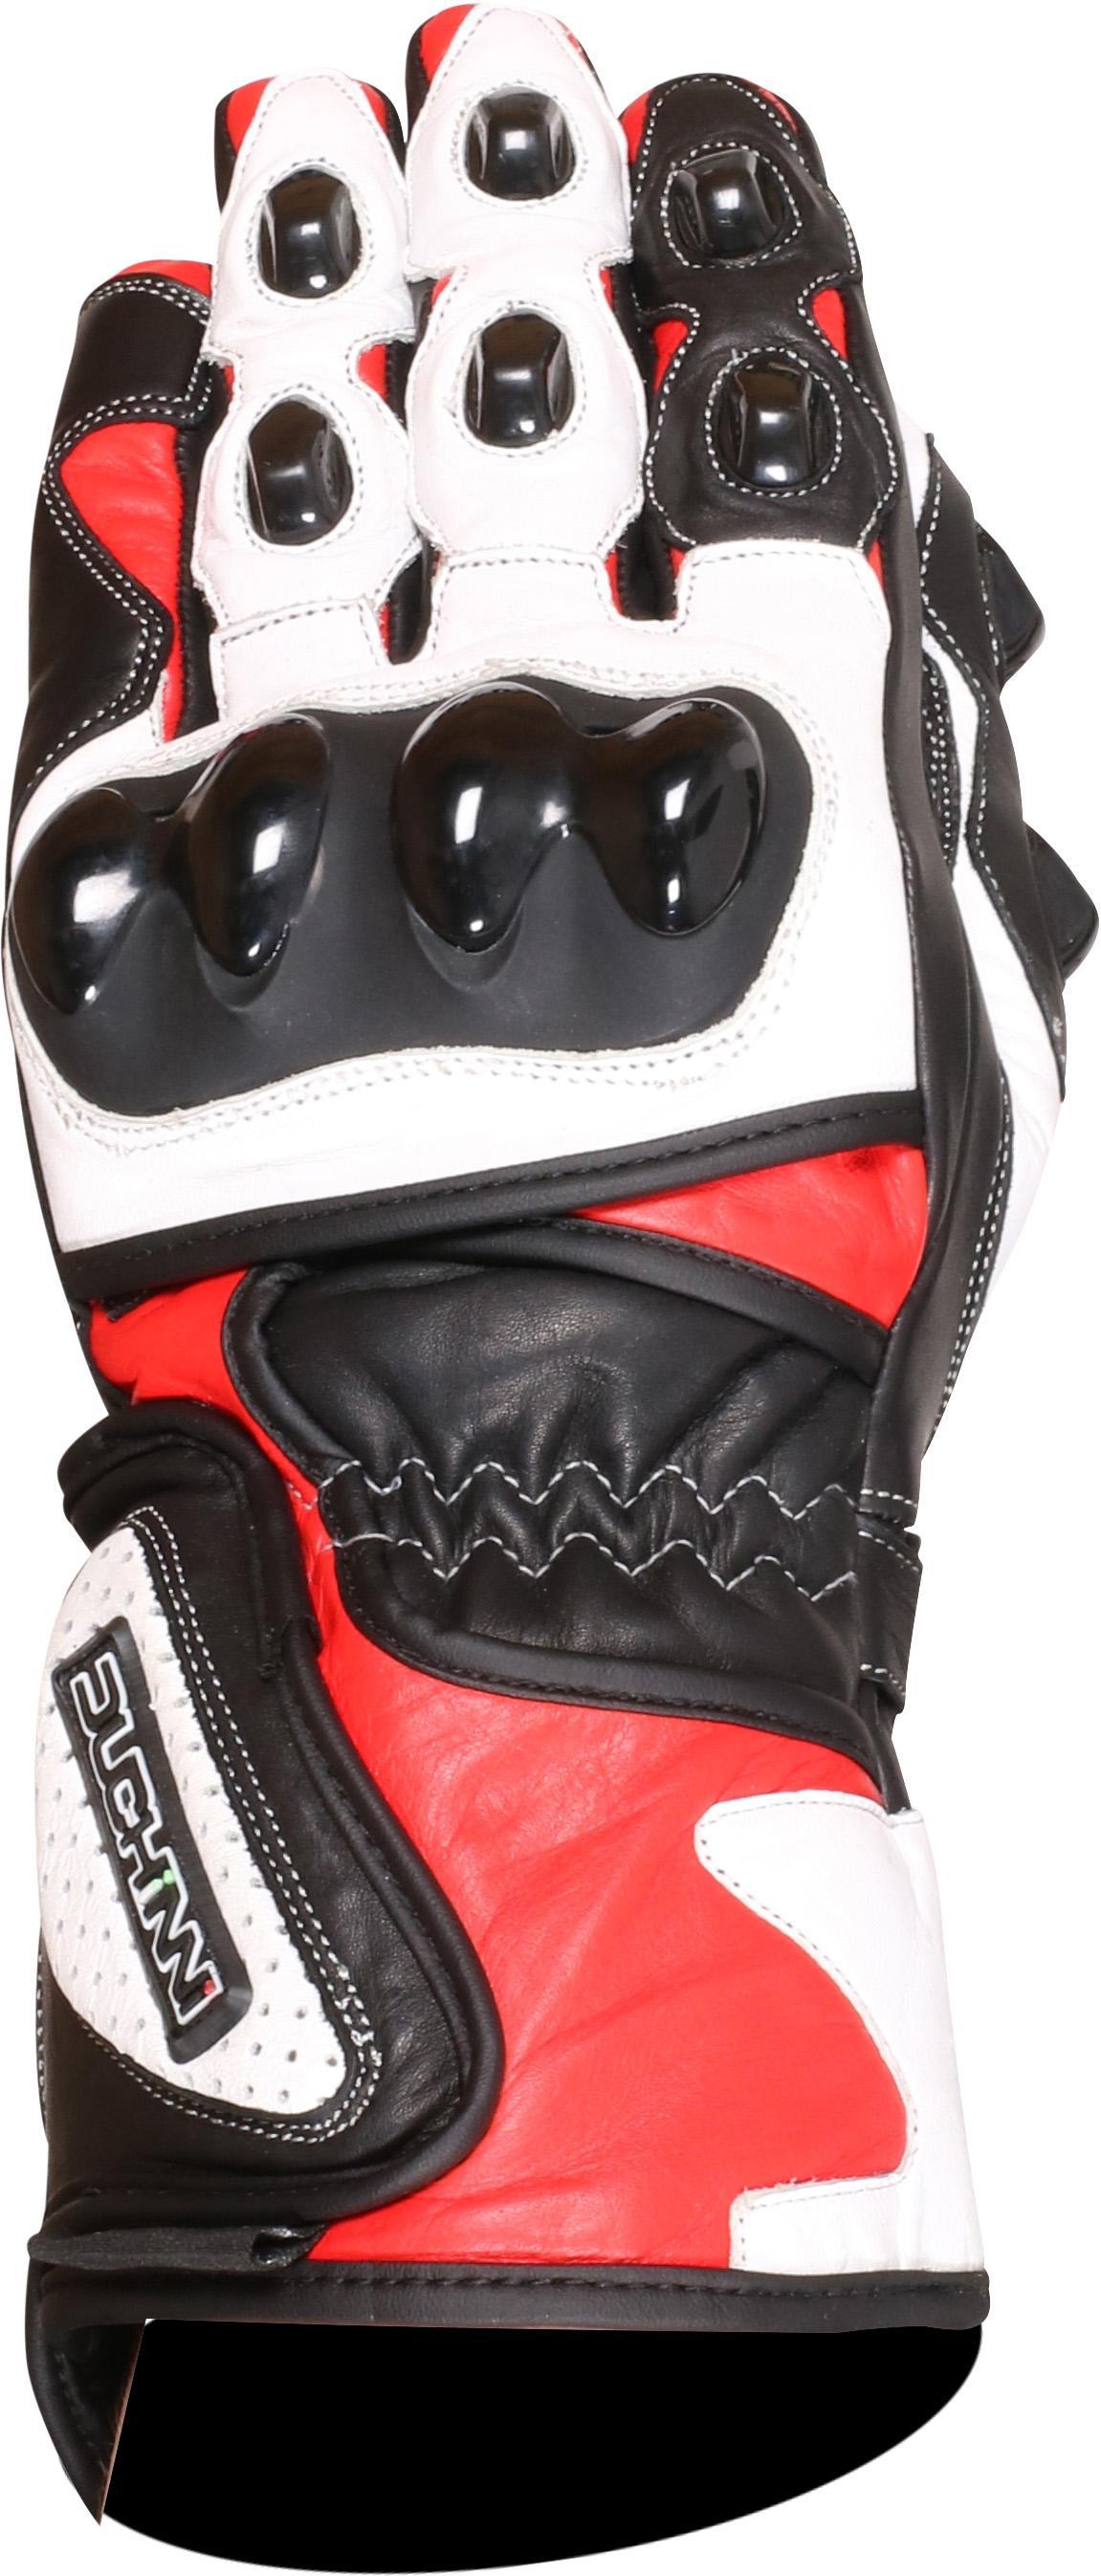 Duchinni Dr1 Motorcycle Gloves - Black And Red, 3Xl